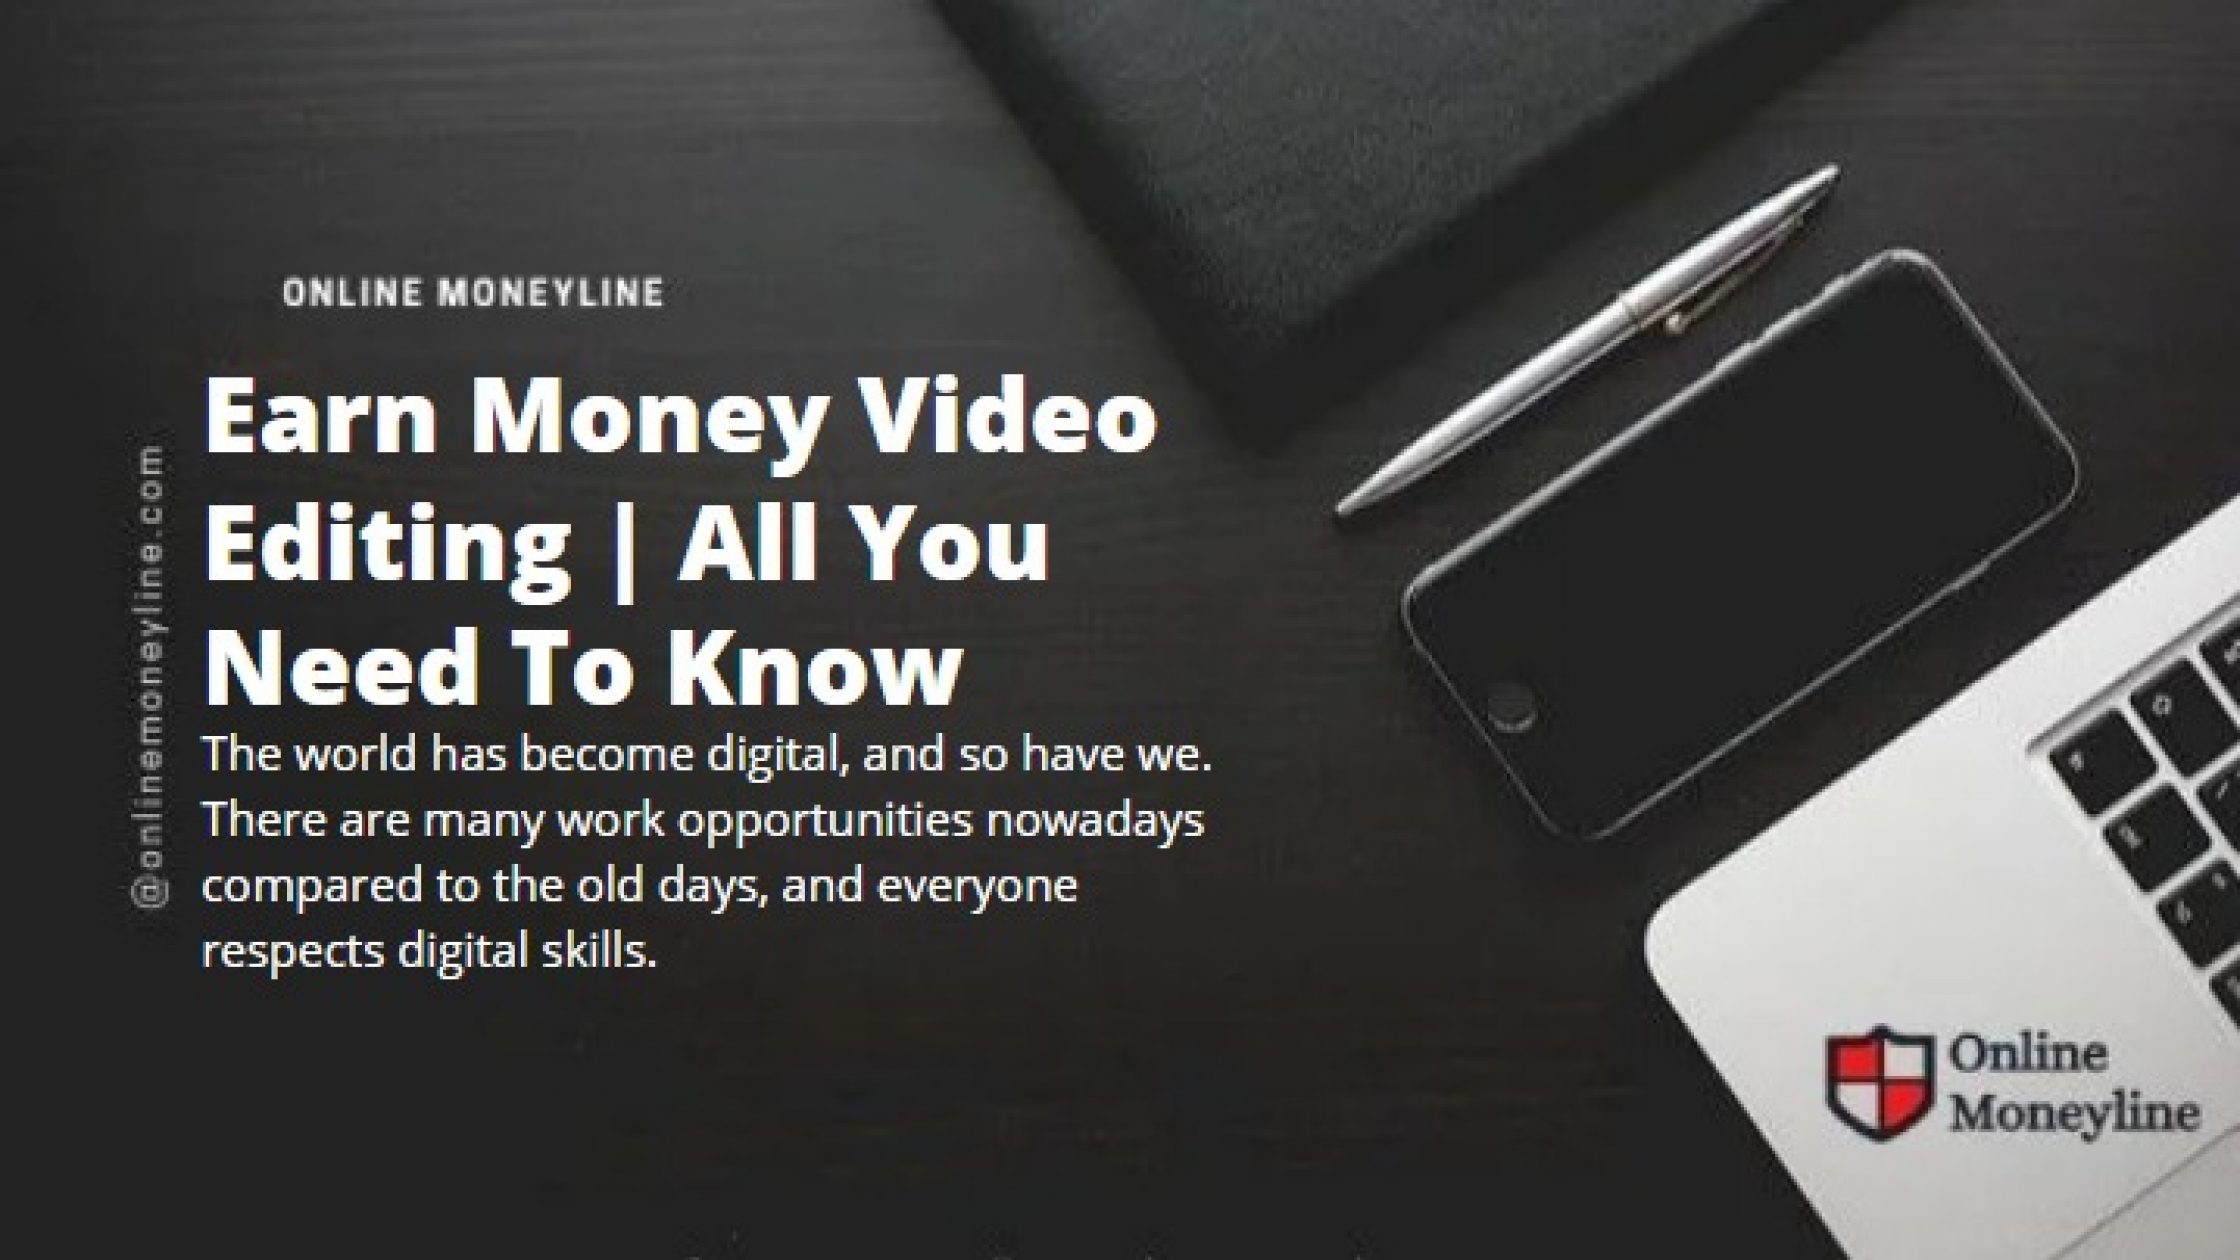 Earn Money Video Editing | All You Need To Know